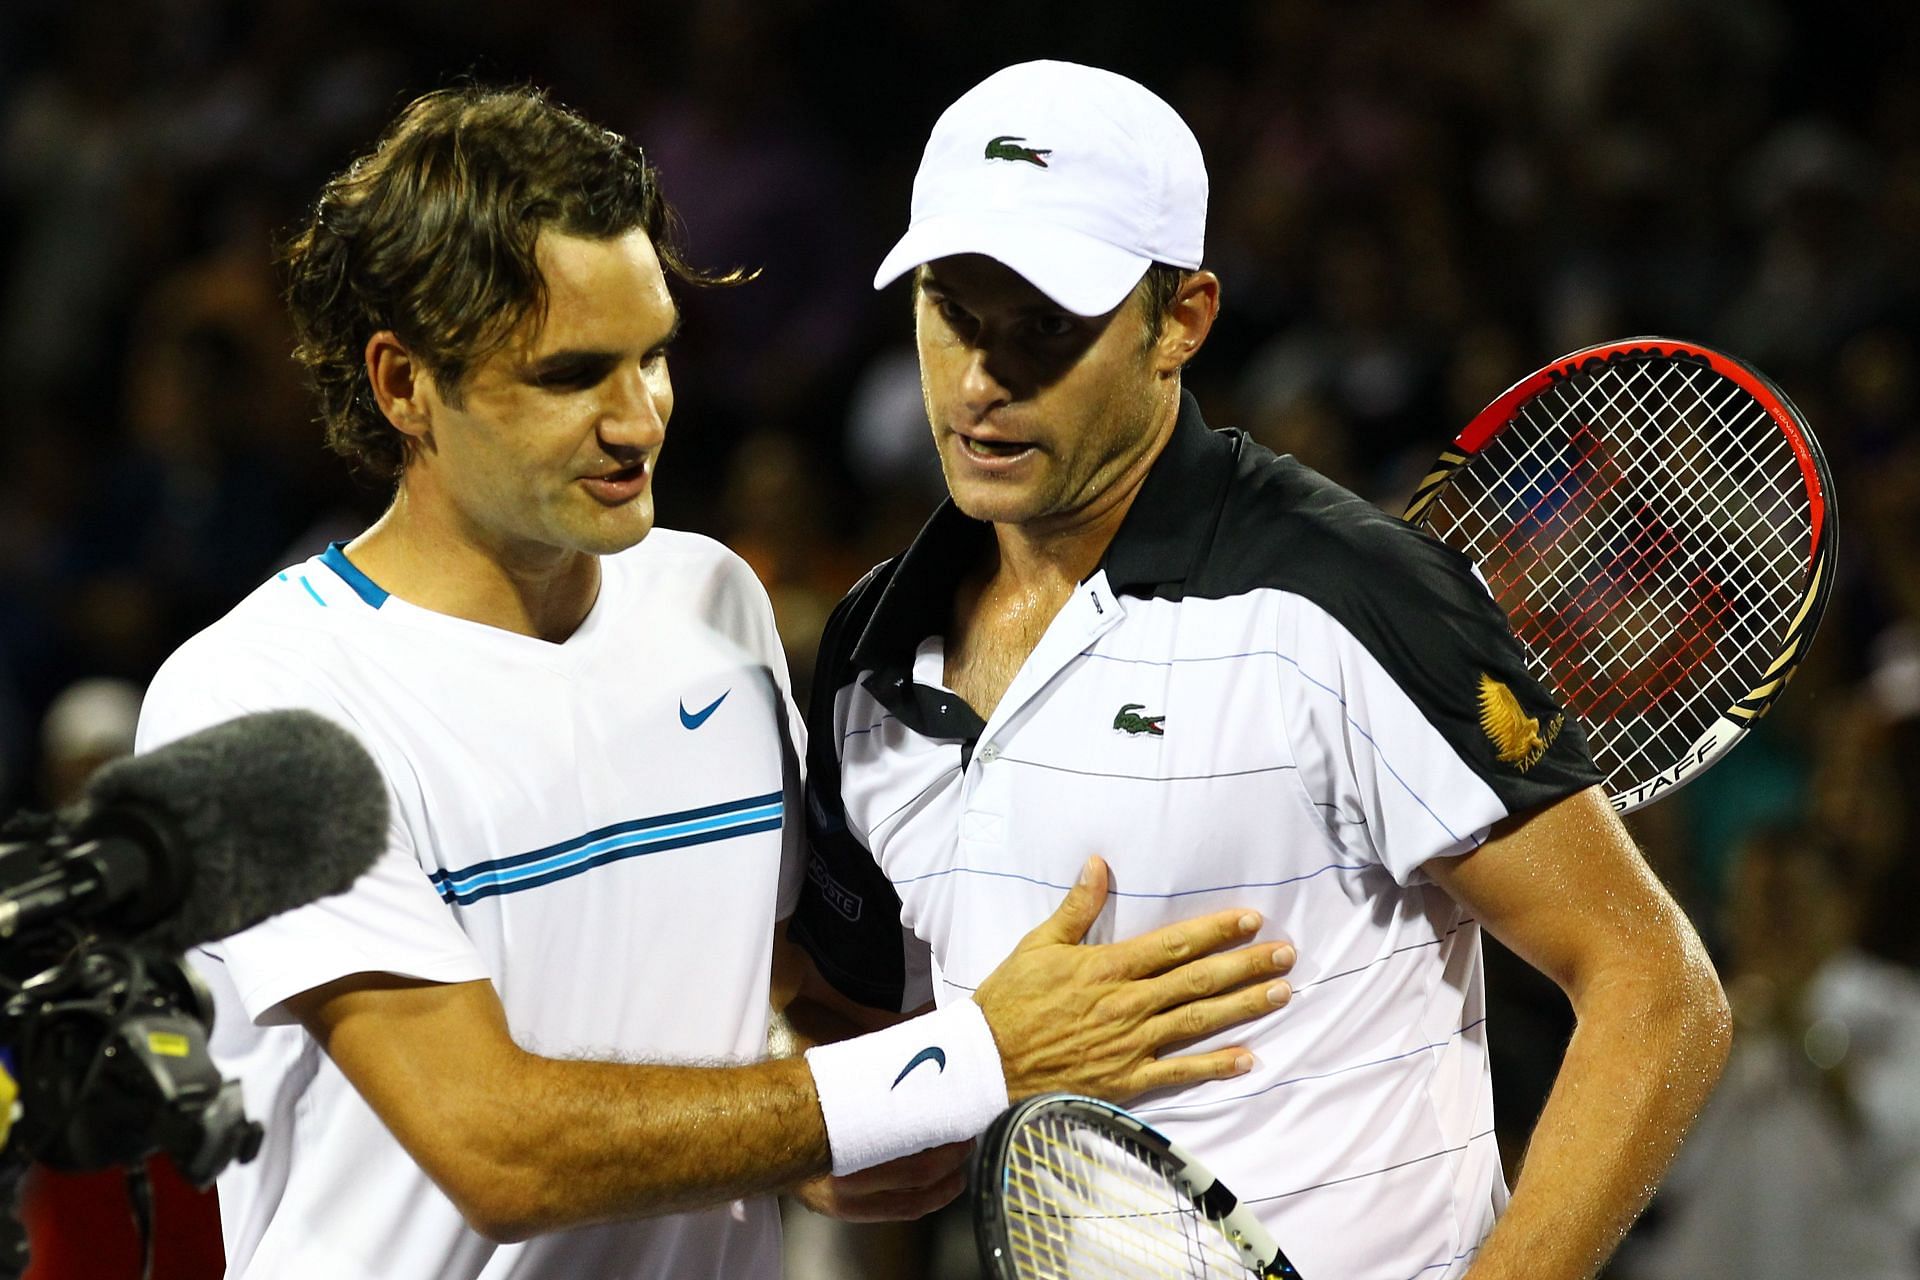 Roger Federer and Andy Roddick met 24 times on the ATP tour